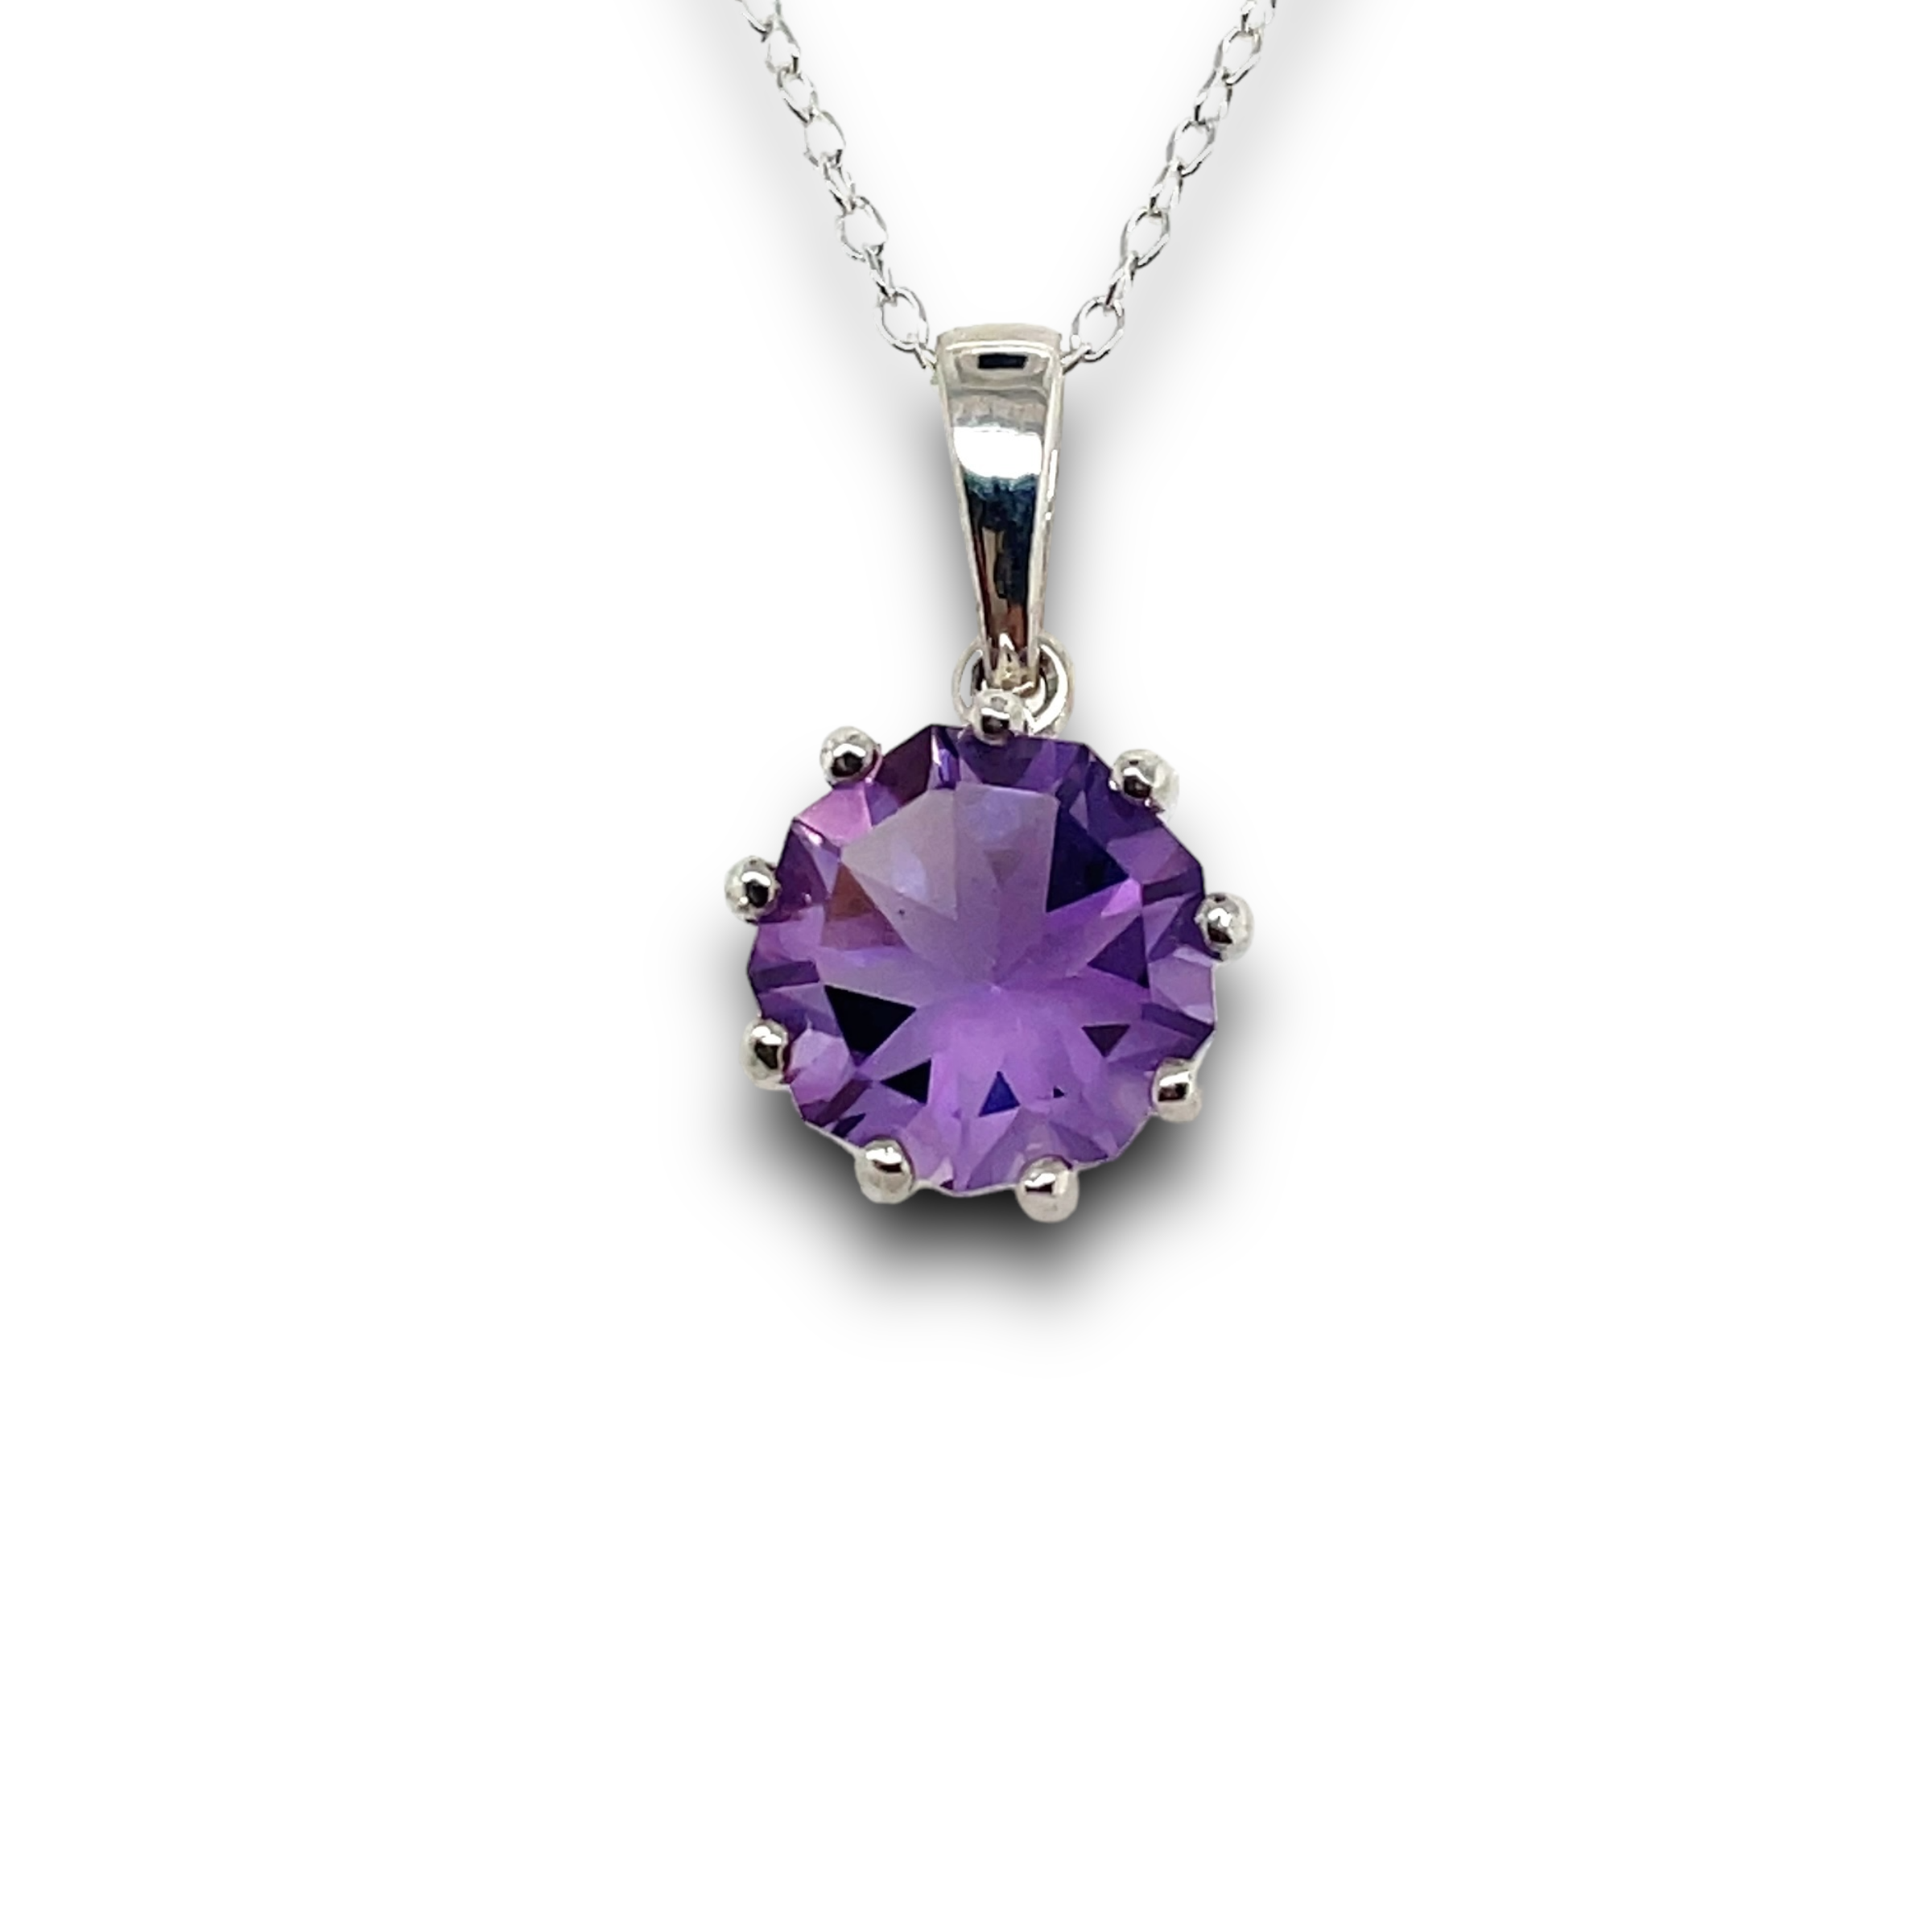 Amethyst Necklace in Sterling Silver